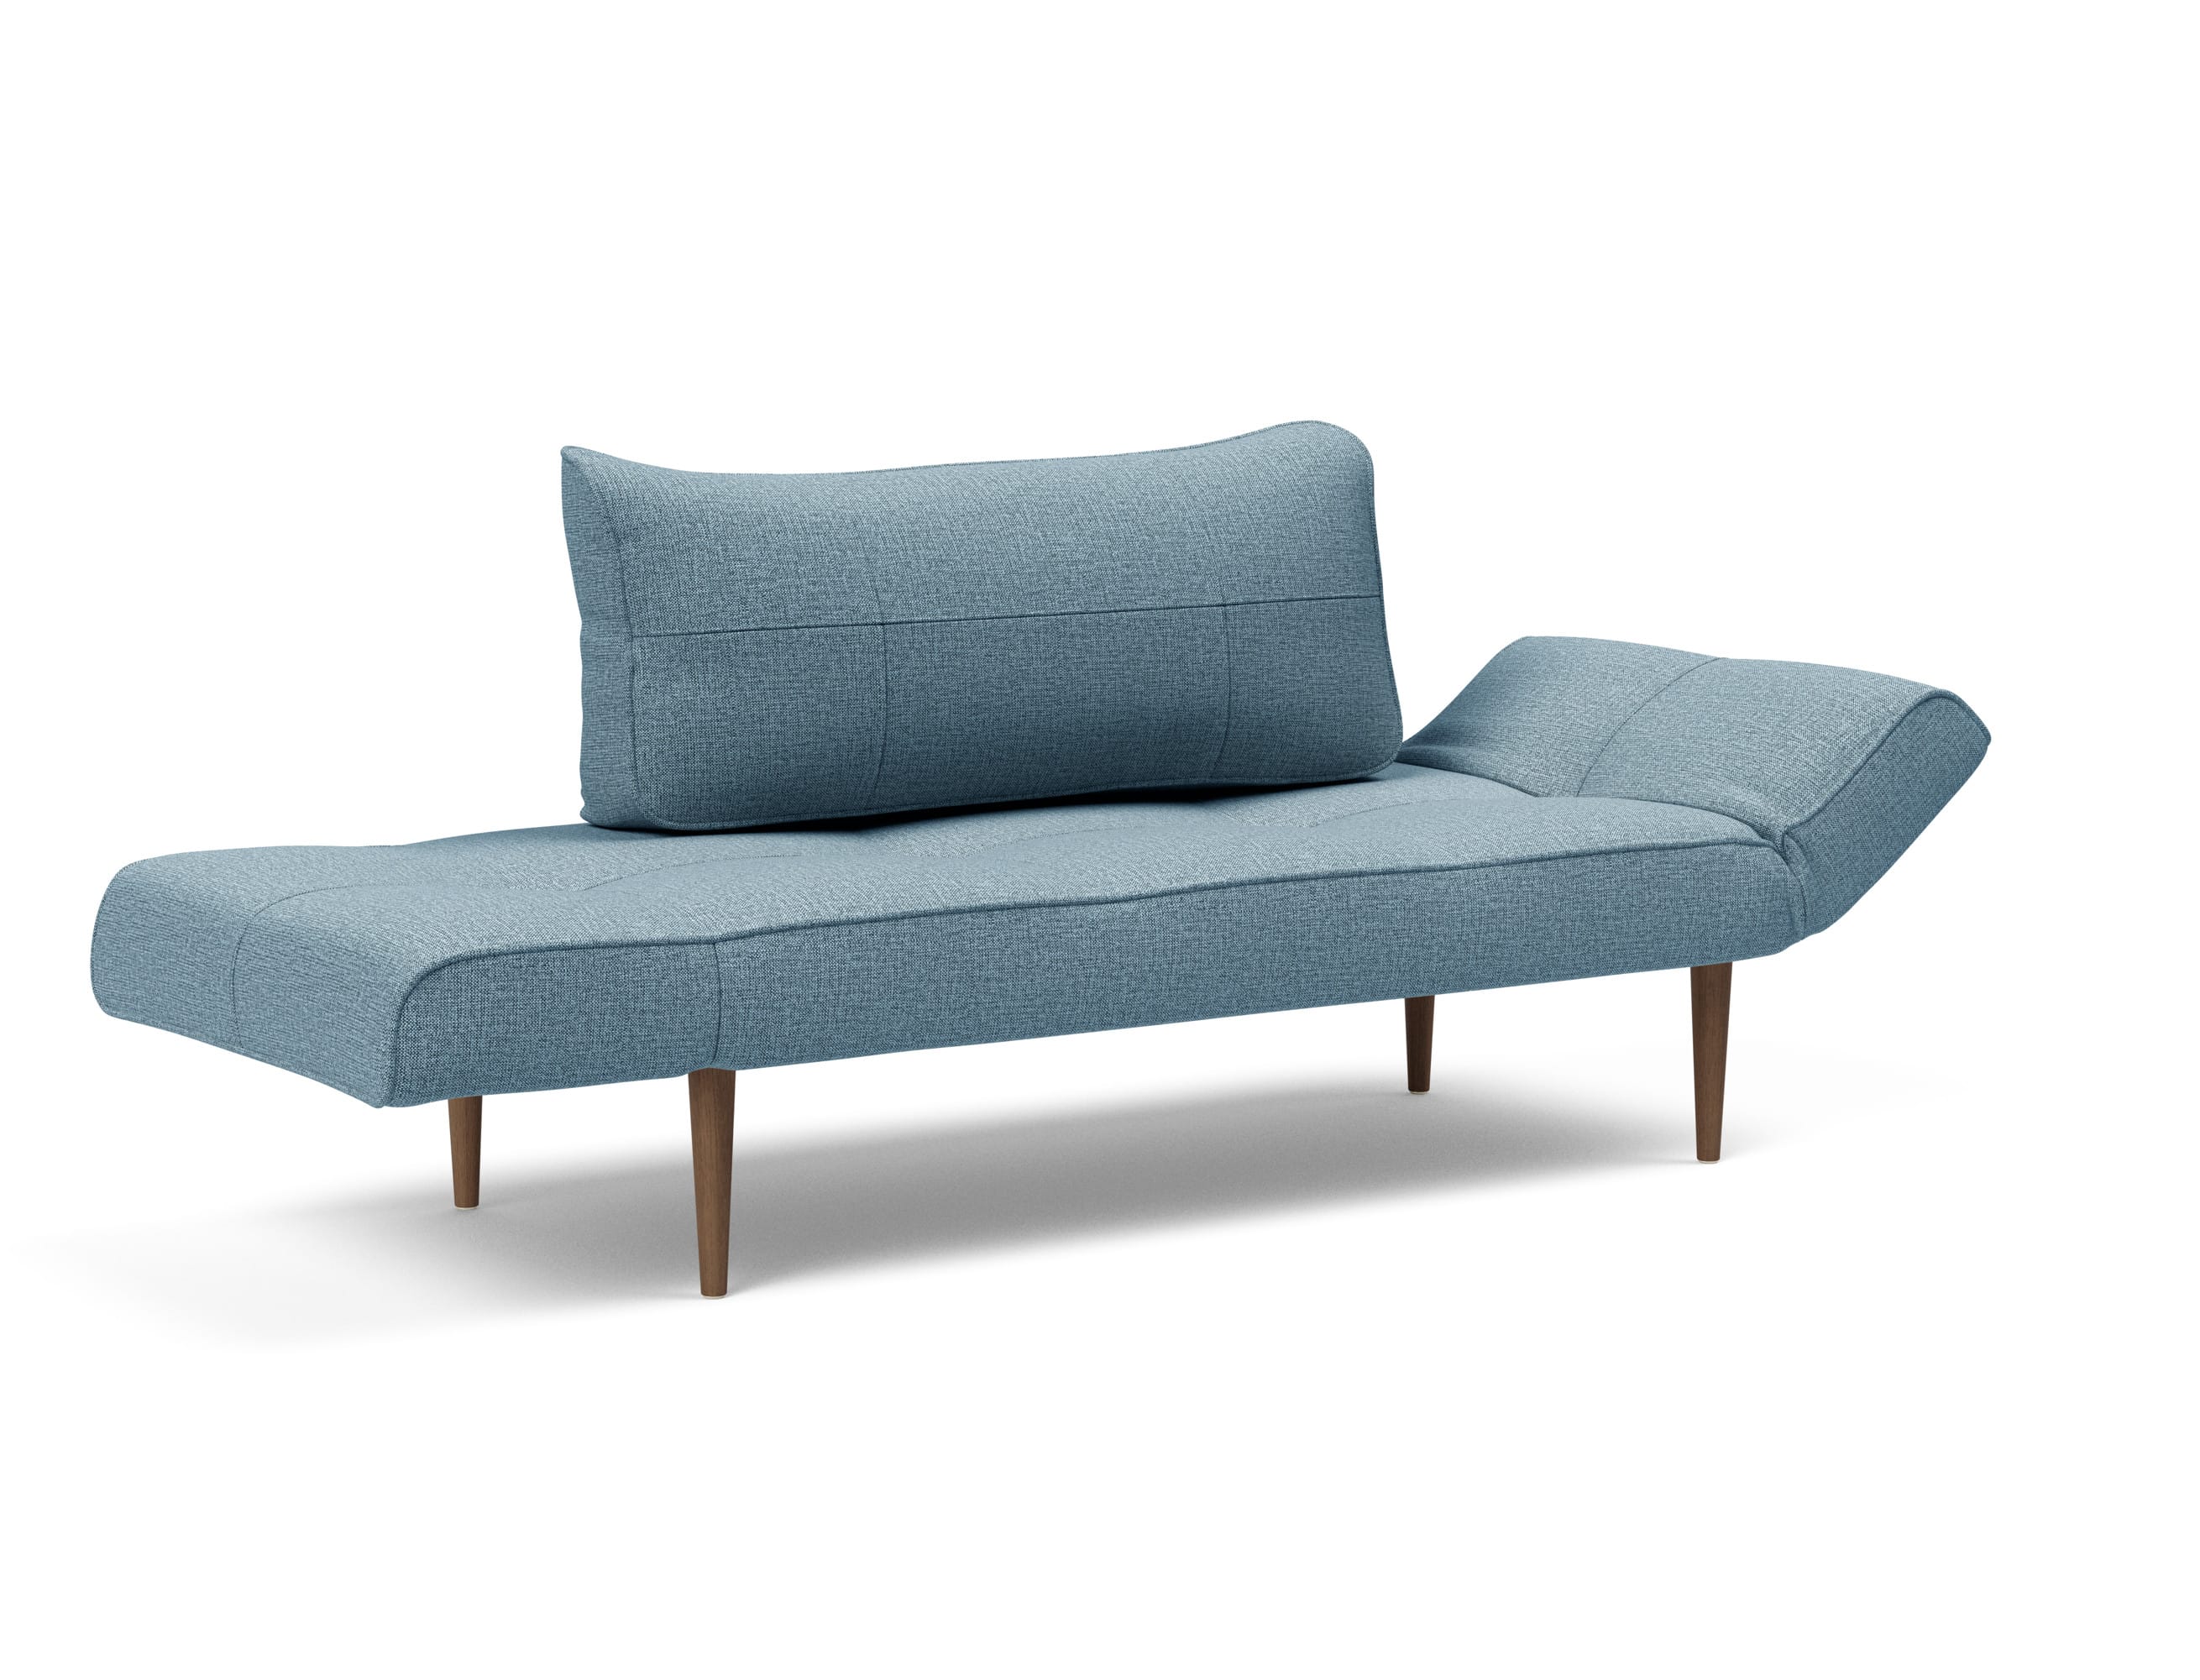 Zeal Deluxe Daybed Light Sofa Blue Bed by Dance Innovation Mixed